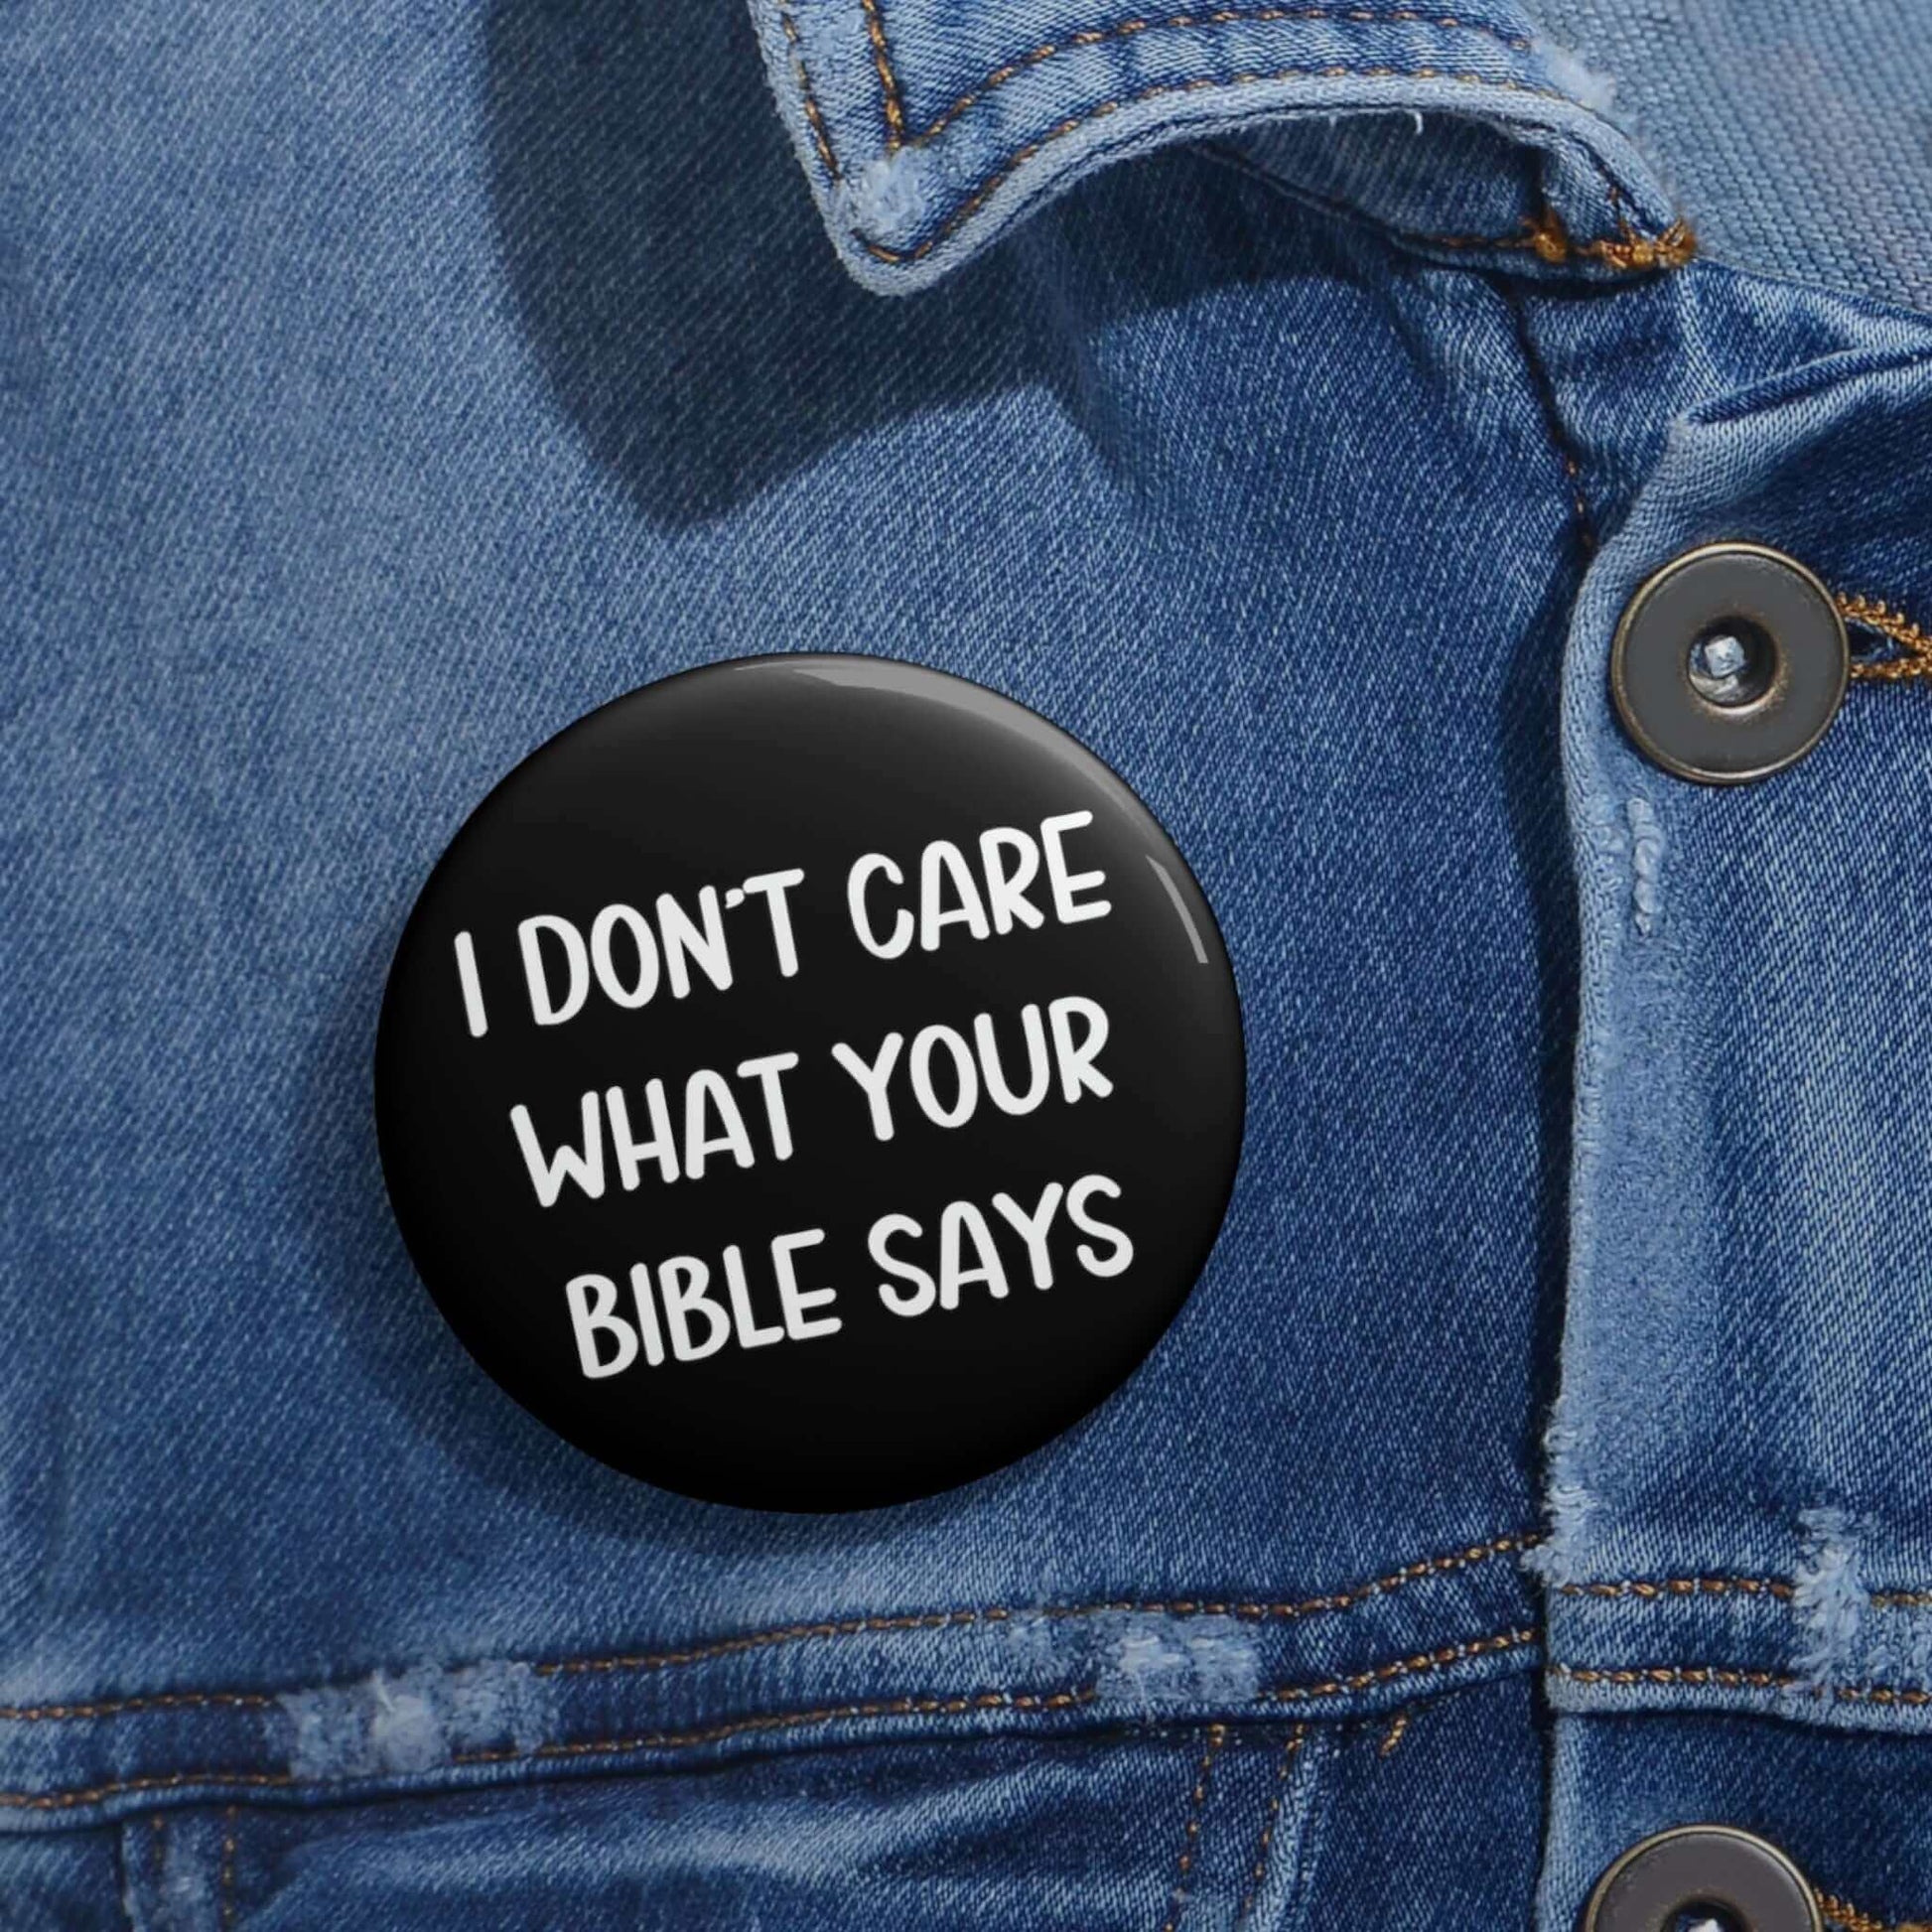 Pinback button that says I don't care what your bible says.